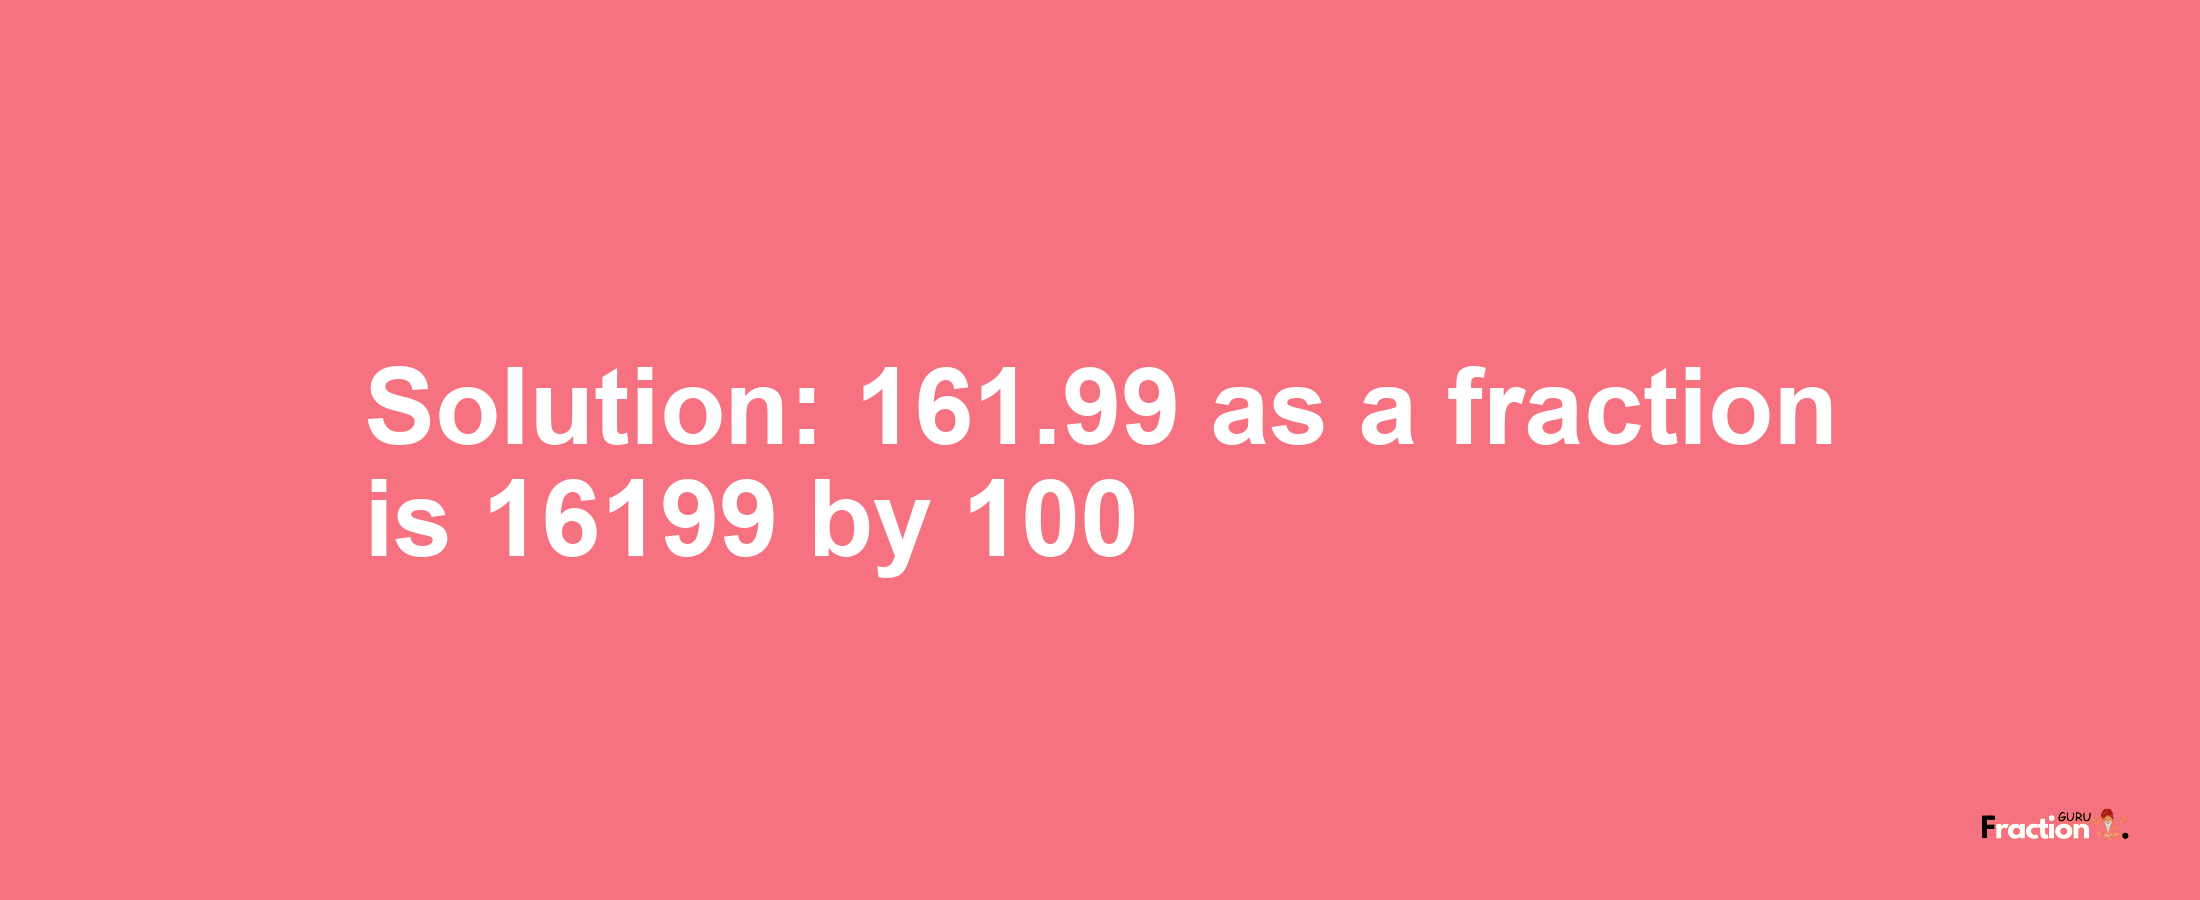 Solution:161.99 as a fraction is 16199/100